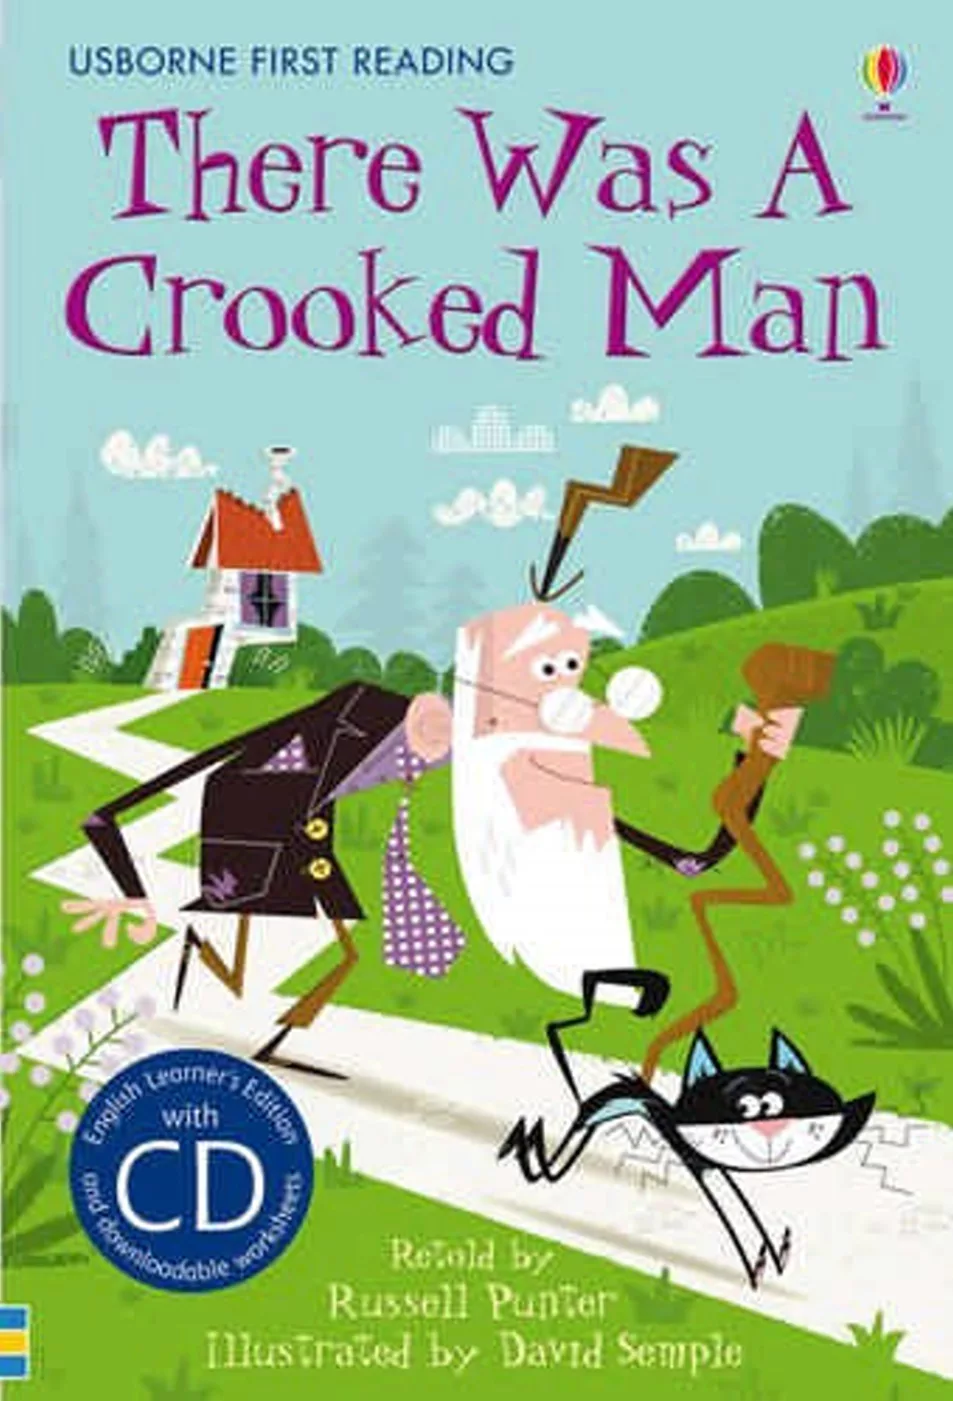 There was a Crooked Man (with CD) (Usborne English Learners’ Editions: Elementary)